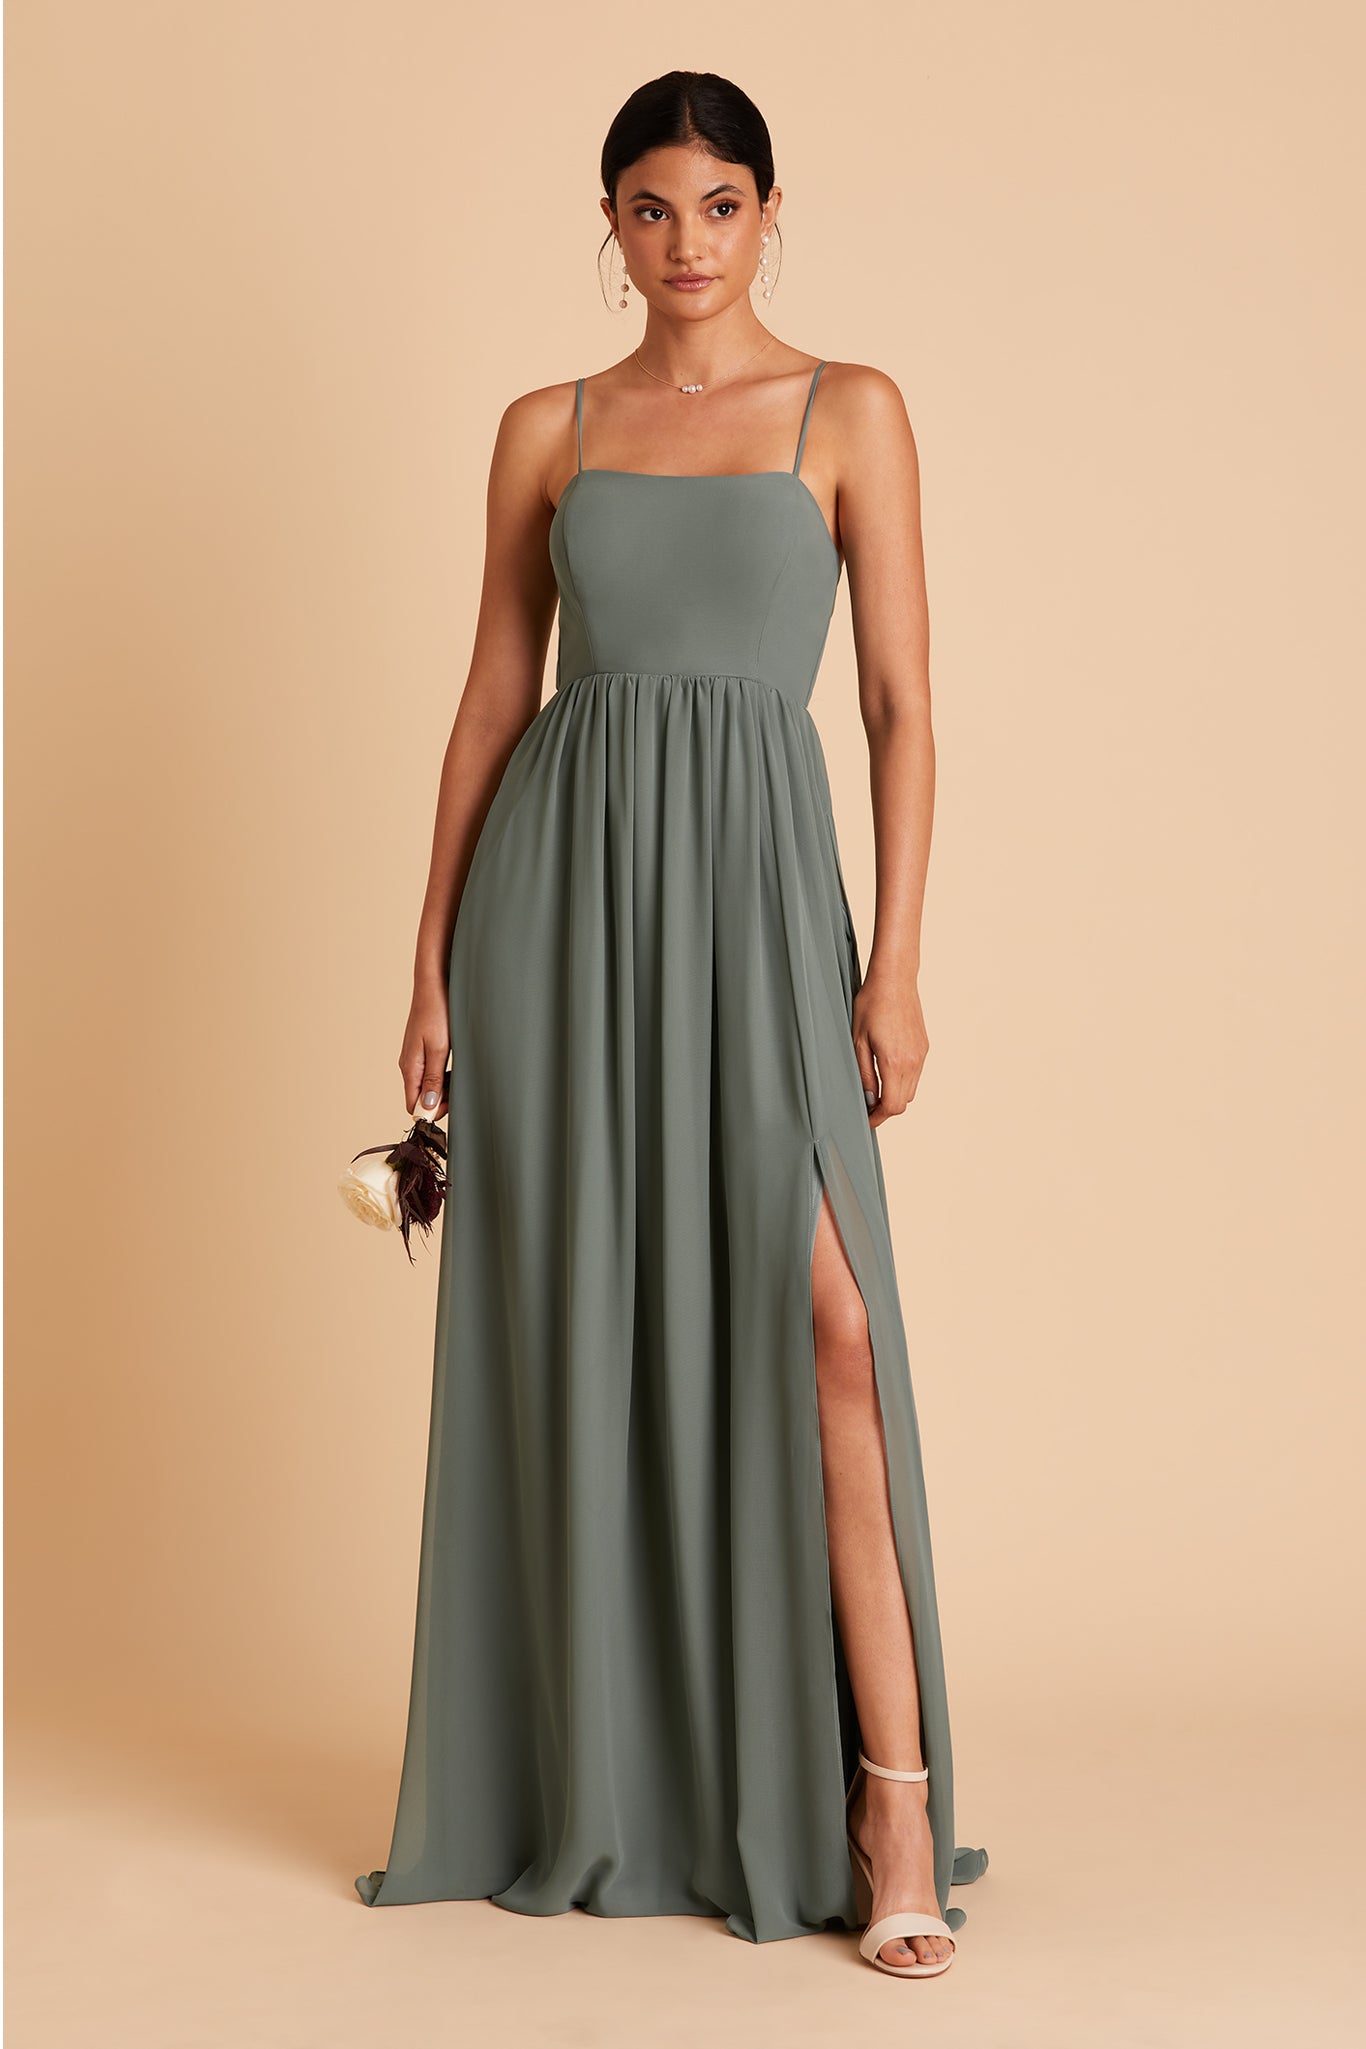 Sea Glass August Convertible Dress by Birdy Grey